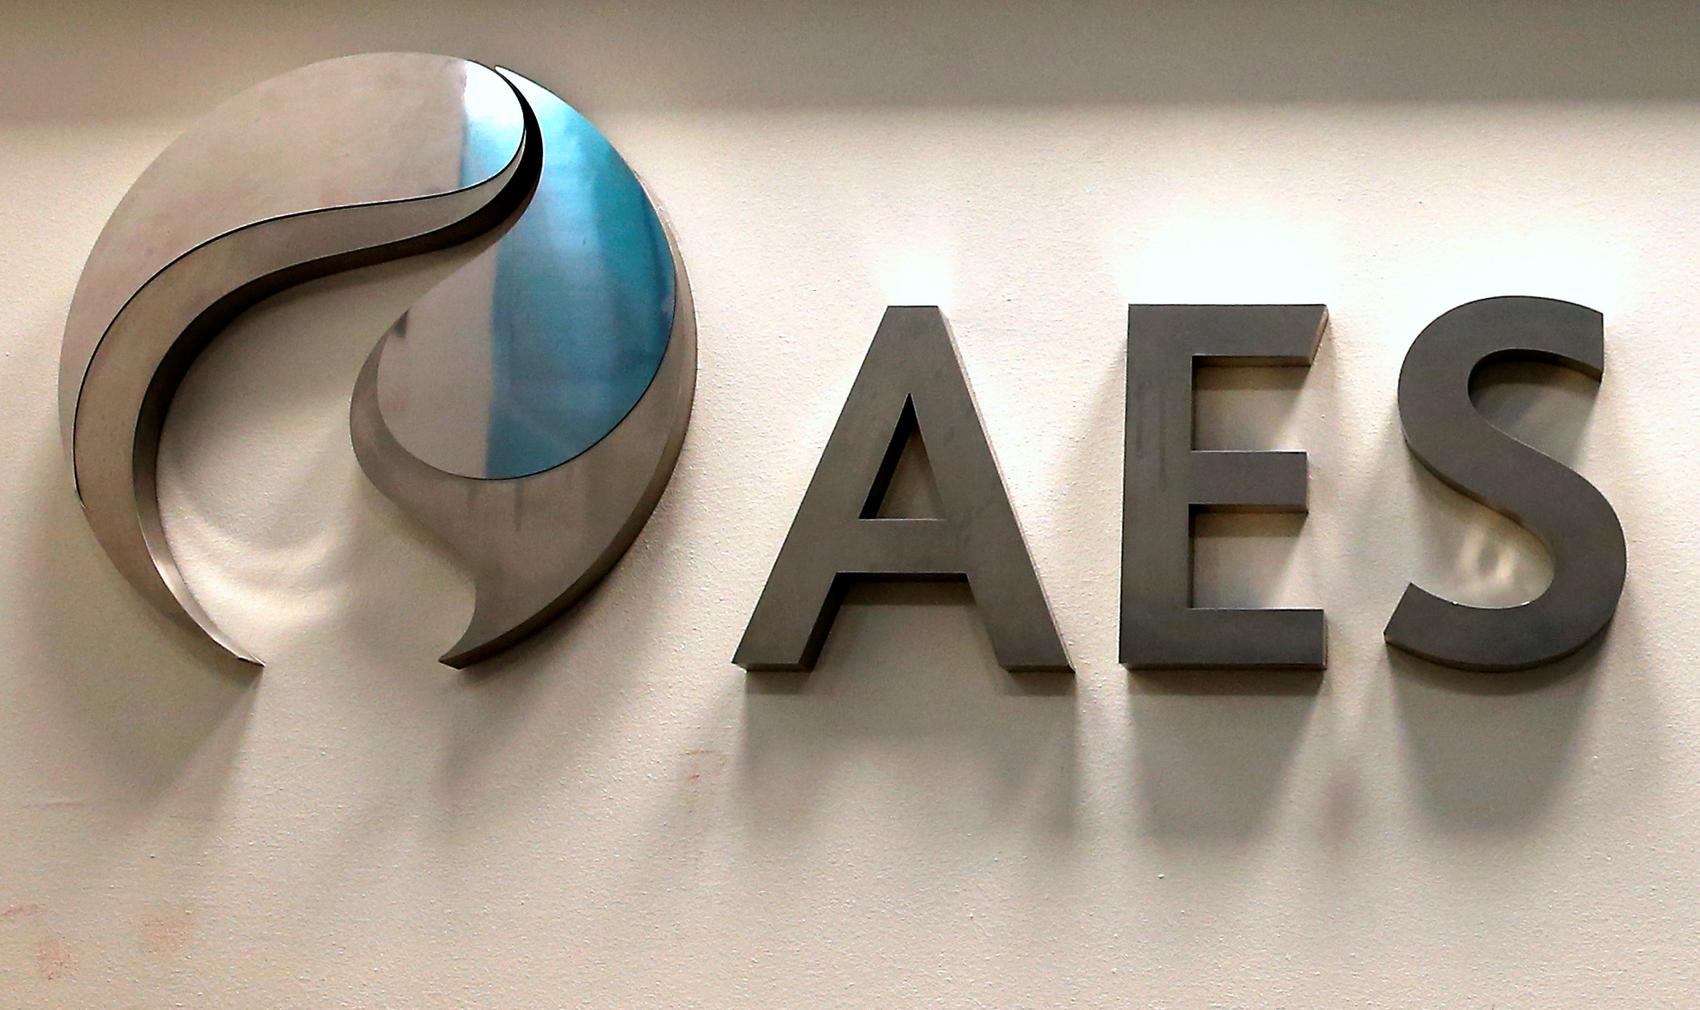 AES in talks to sell major coal-fired power plant in Vietnam: sources